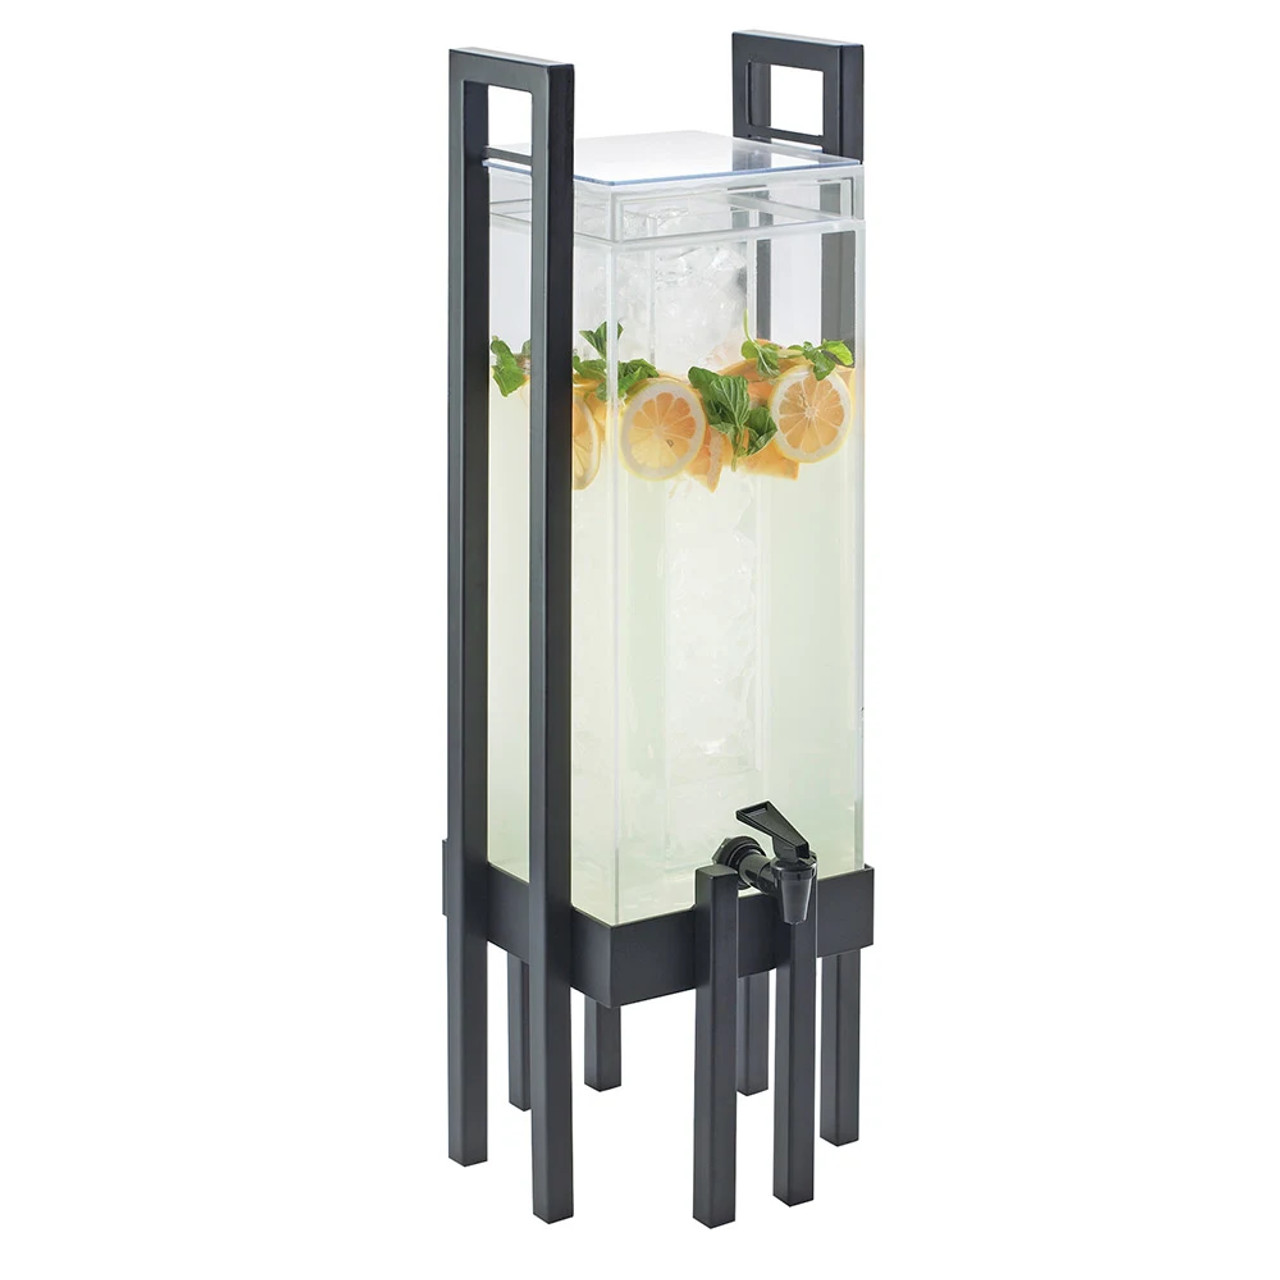 Cal-Mil 3 gal Beverage Dispenser w/ Infuser - Clear Acrylic & Black Steel Frame - Chicken Pieces